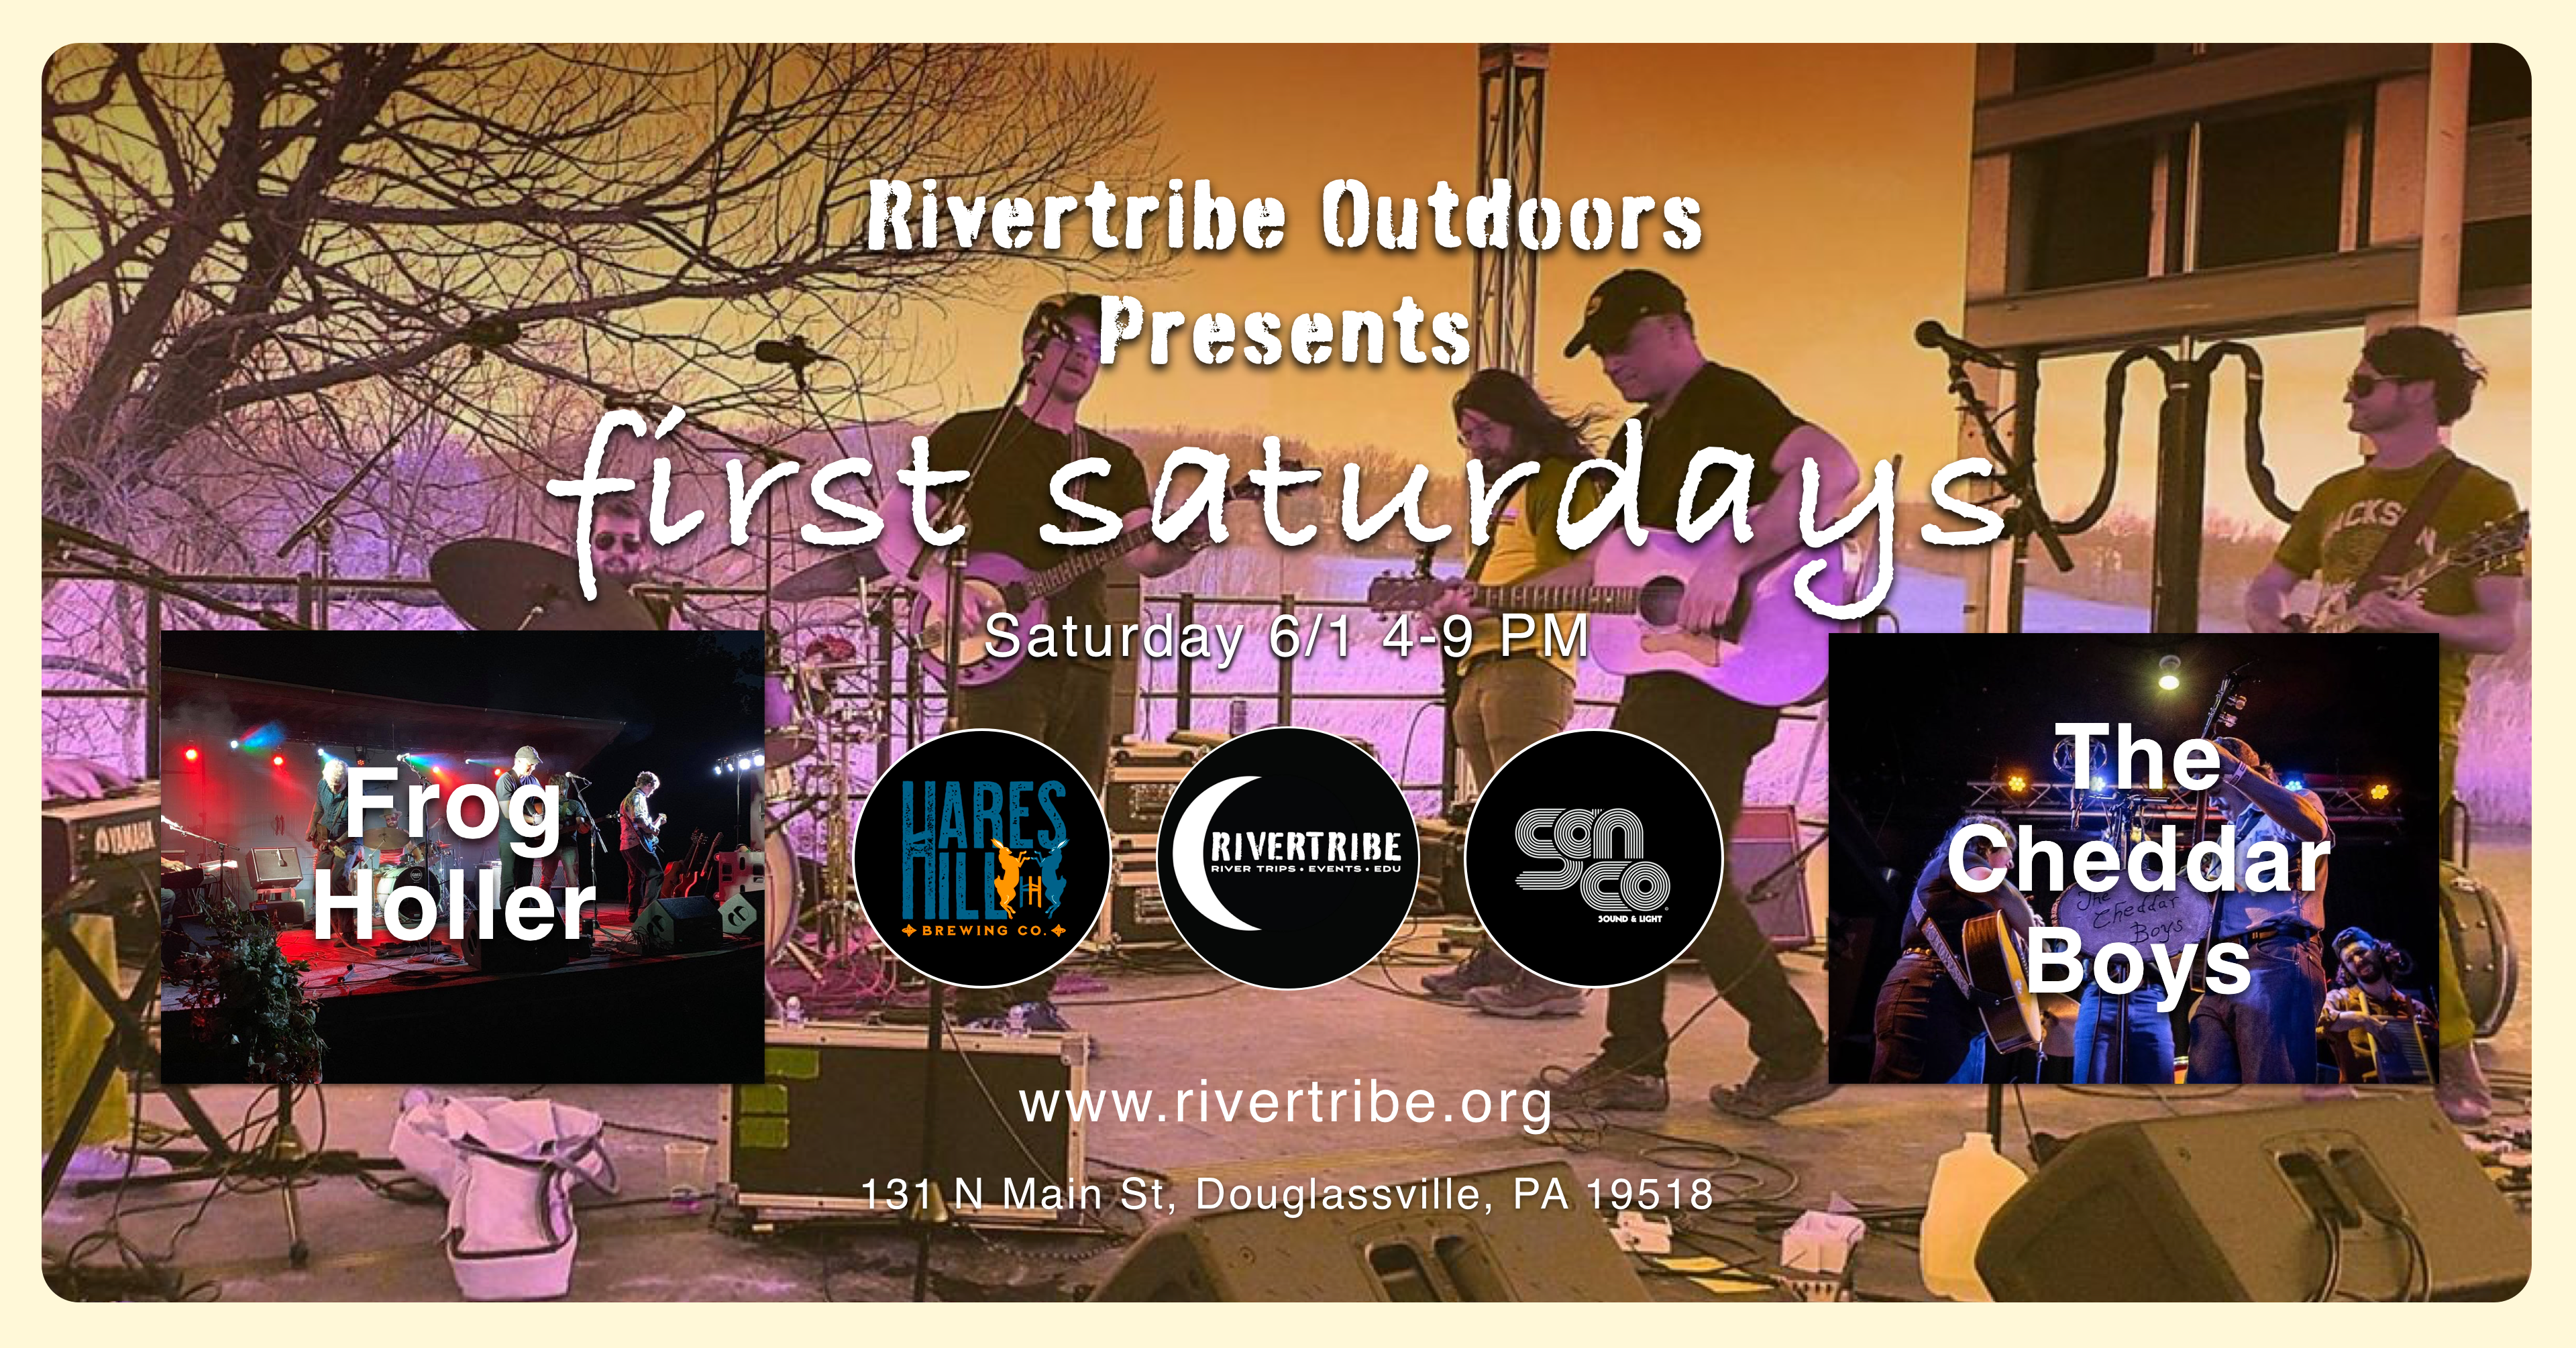 Rivertribe Outdoors First Saturdays Saturday June 1st, with Frog Holler and The Cheddar Boys.